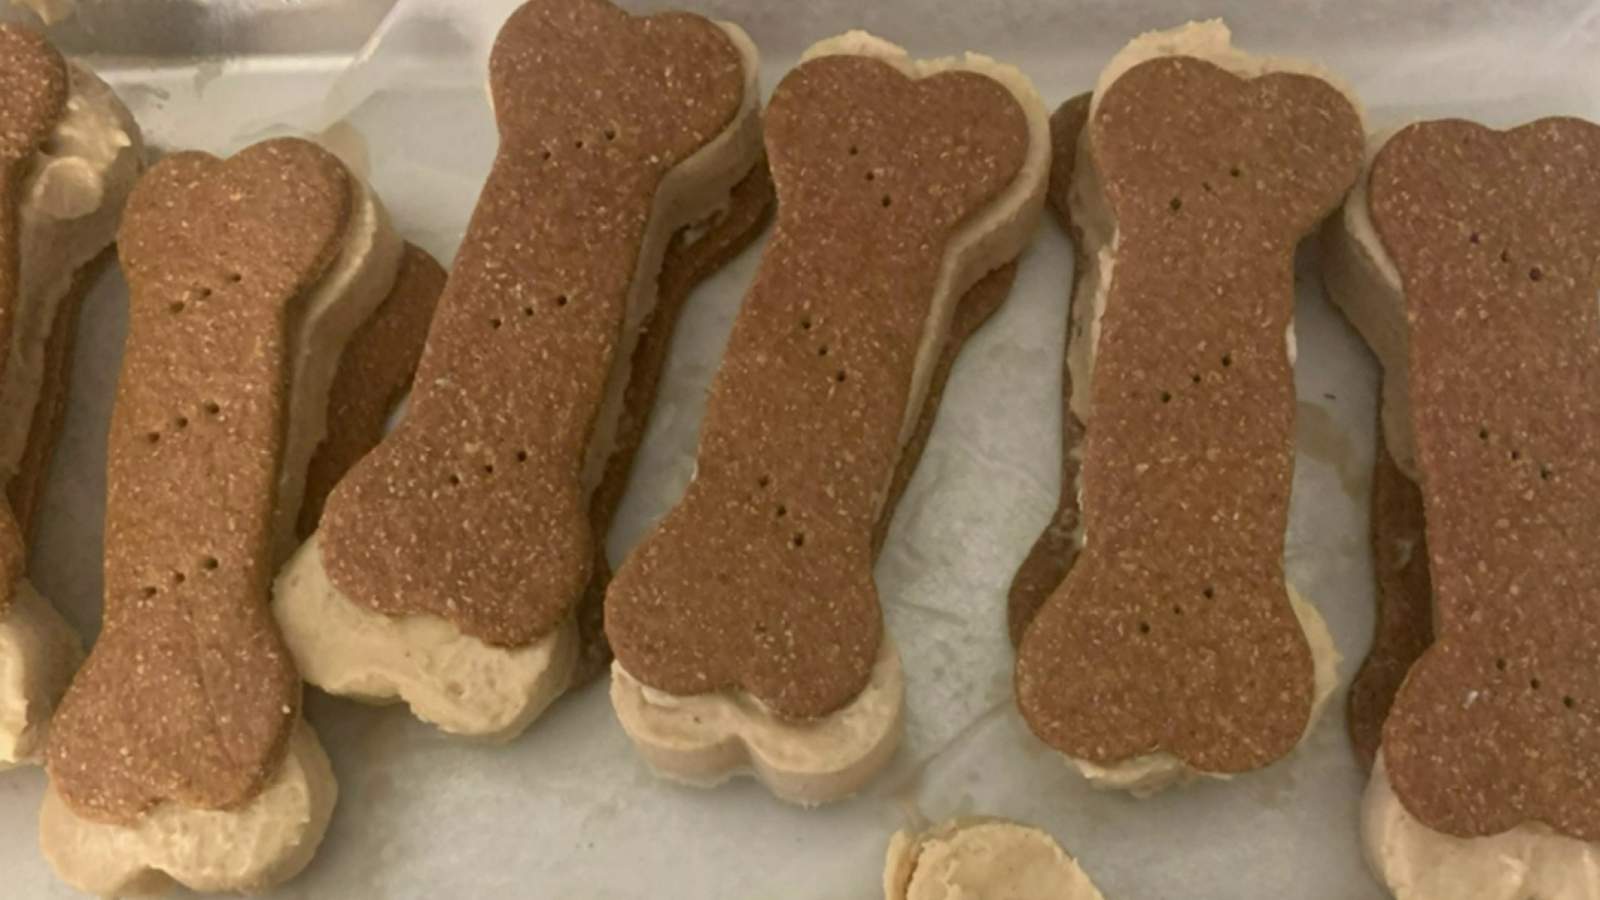 This summer treat will have your dog happily wagging its tail